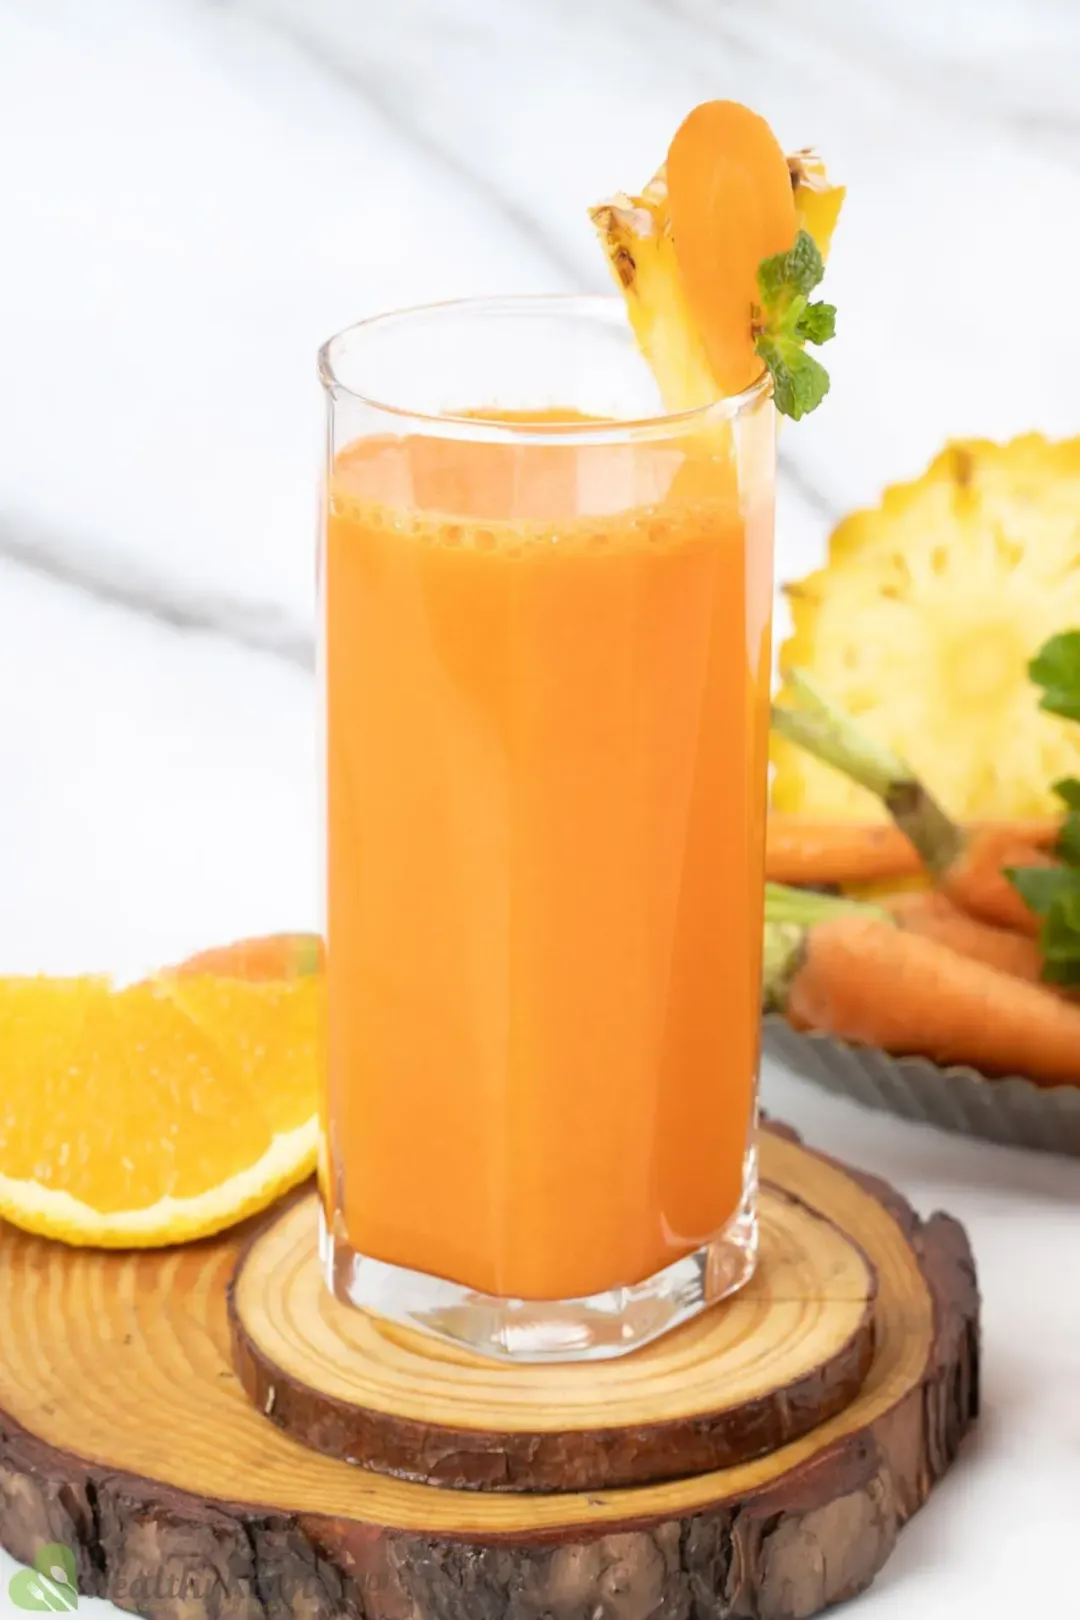 A tall glass of carrot orange pineapple juice put on wooden coasters, next to an orange wedge and some carrots